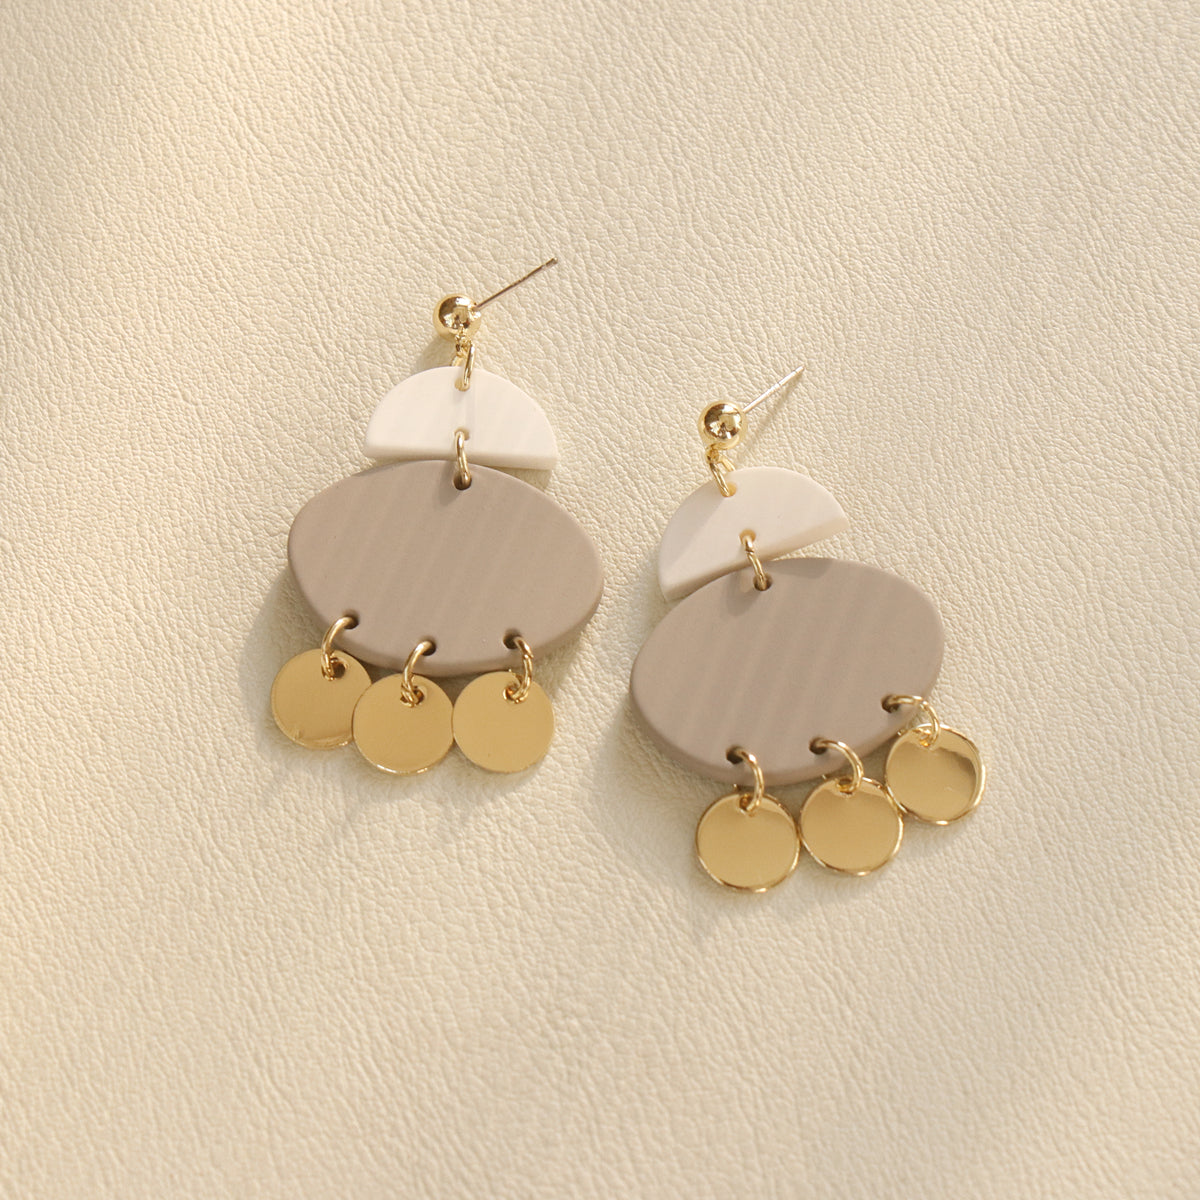 Body Clay Texture Lacquered Acrylic Earrings